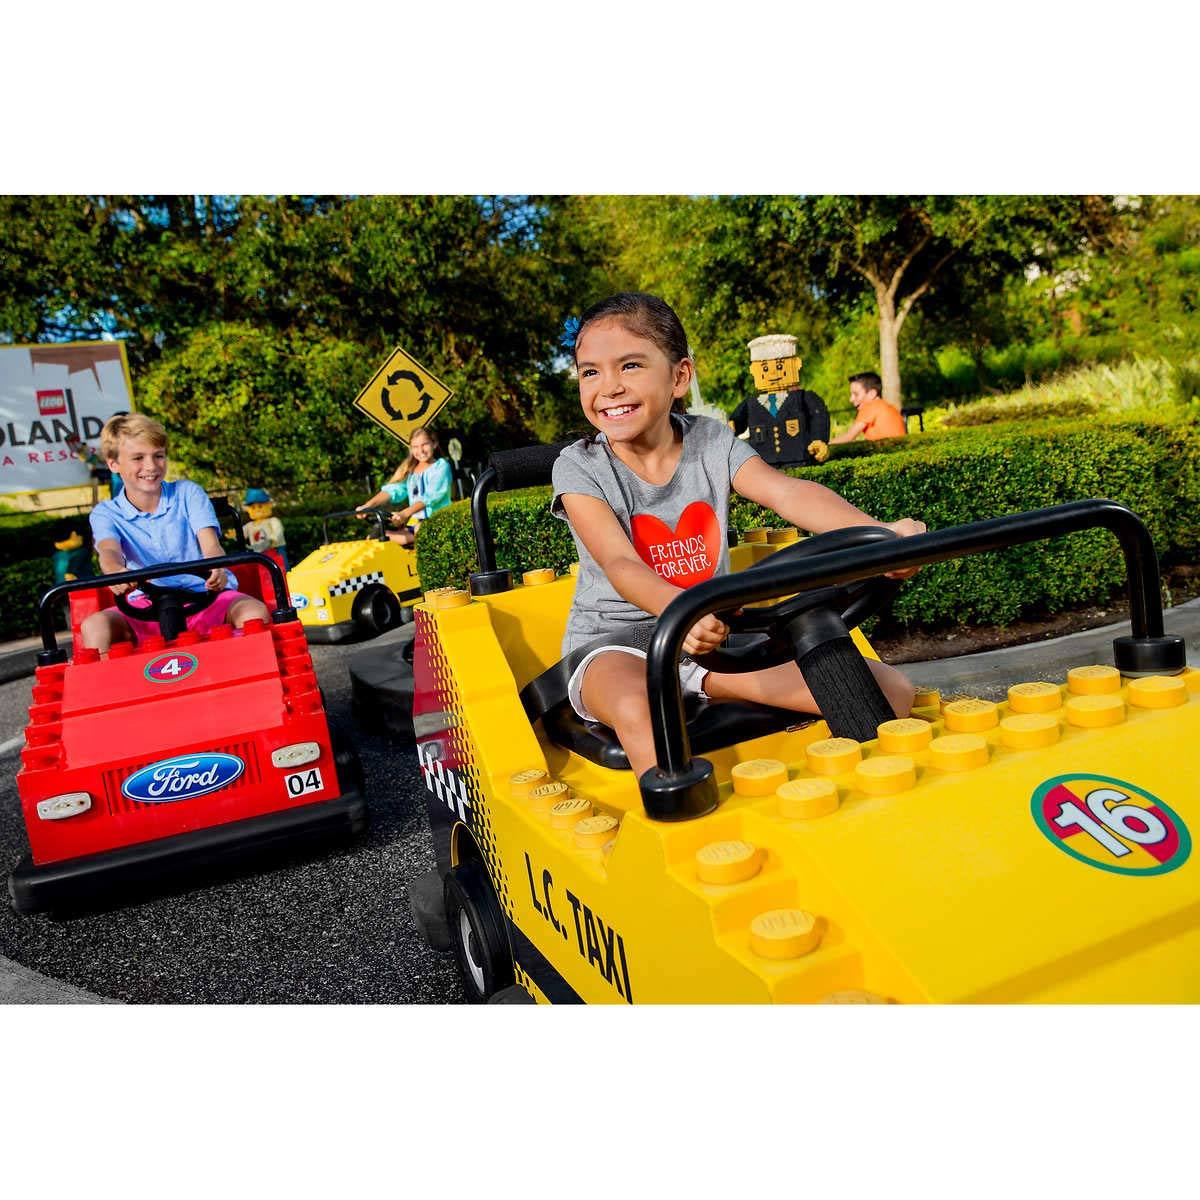 costco travel packages legoland